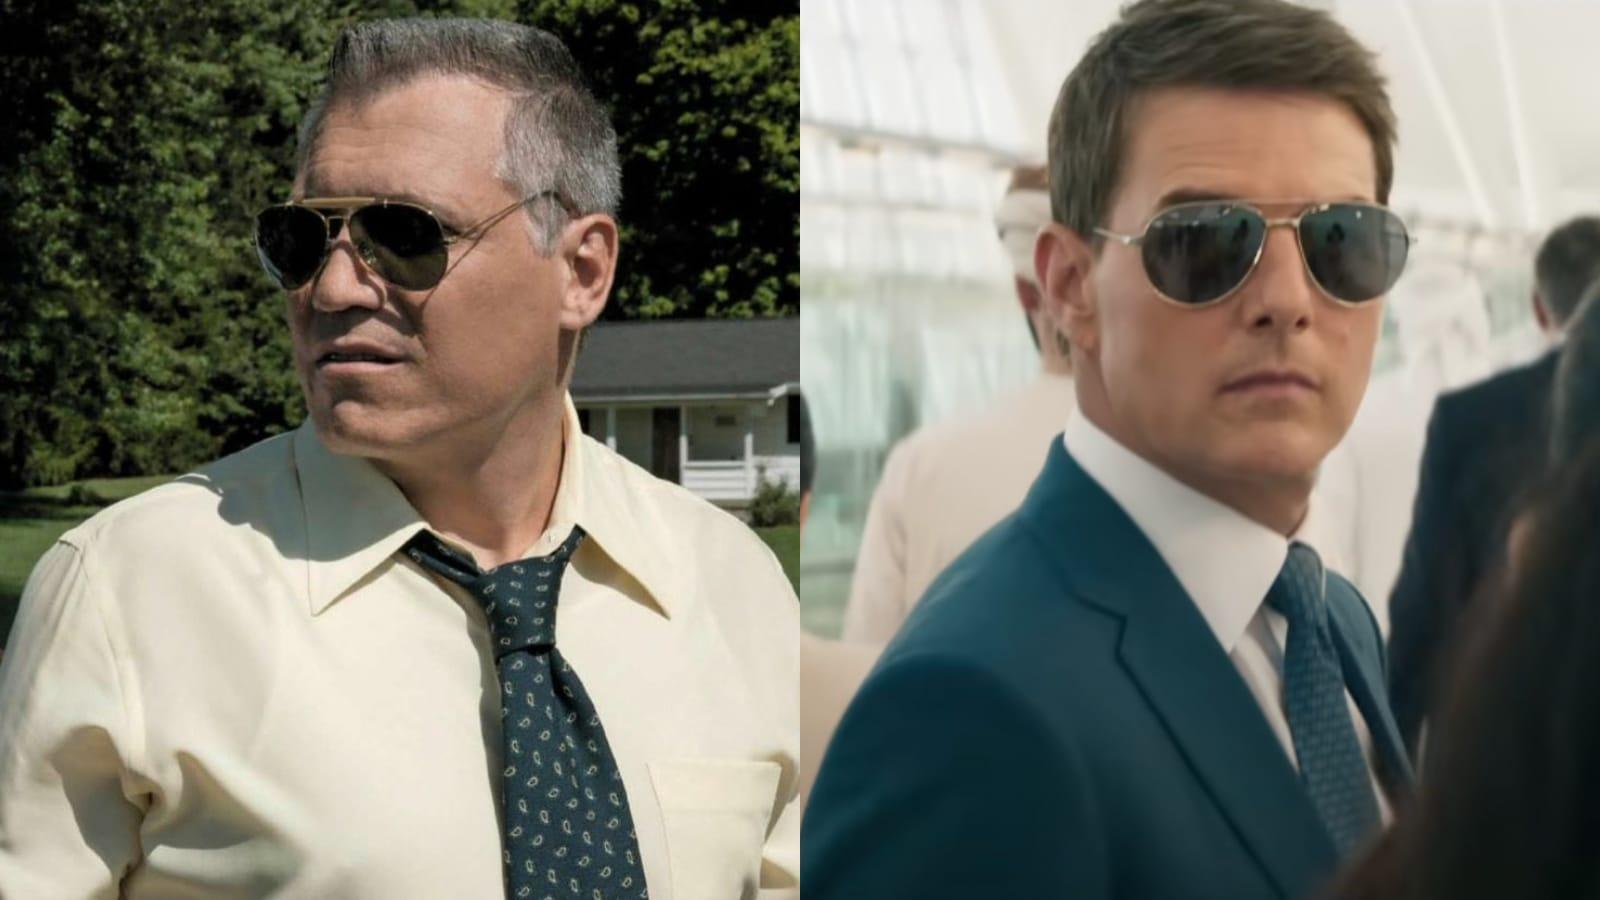 Holt McCallany in Mindhunter and Tom Cruise as Ethan Hunt in Mission: Impossible